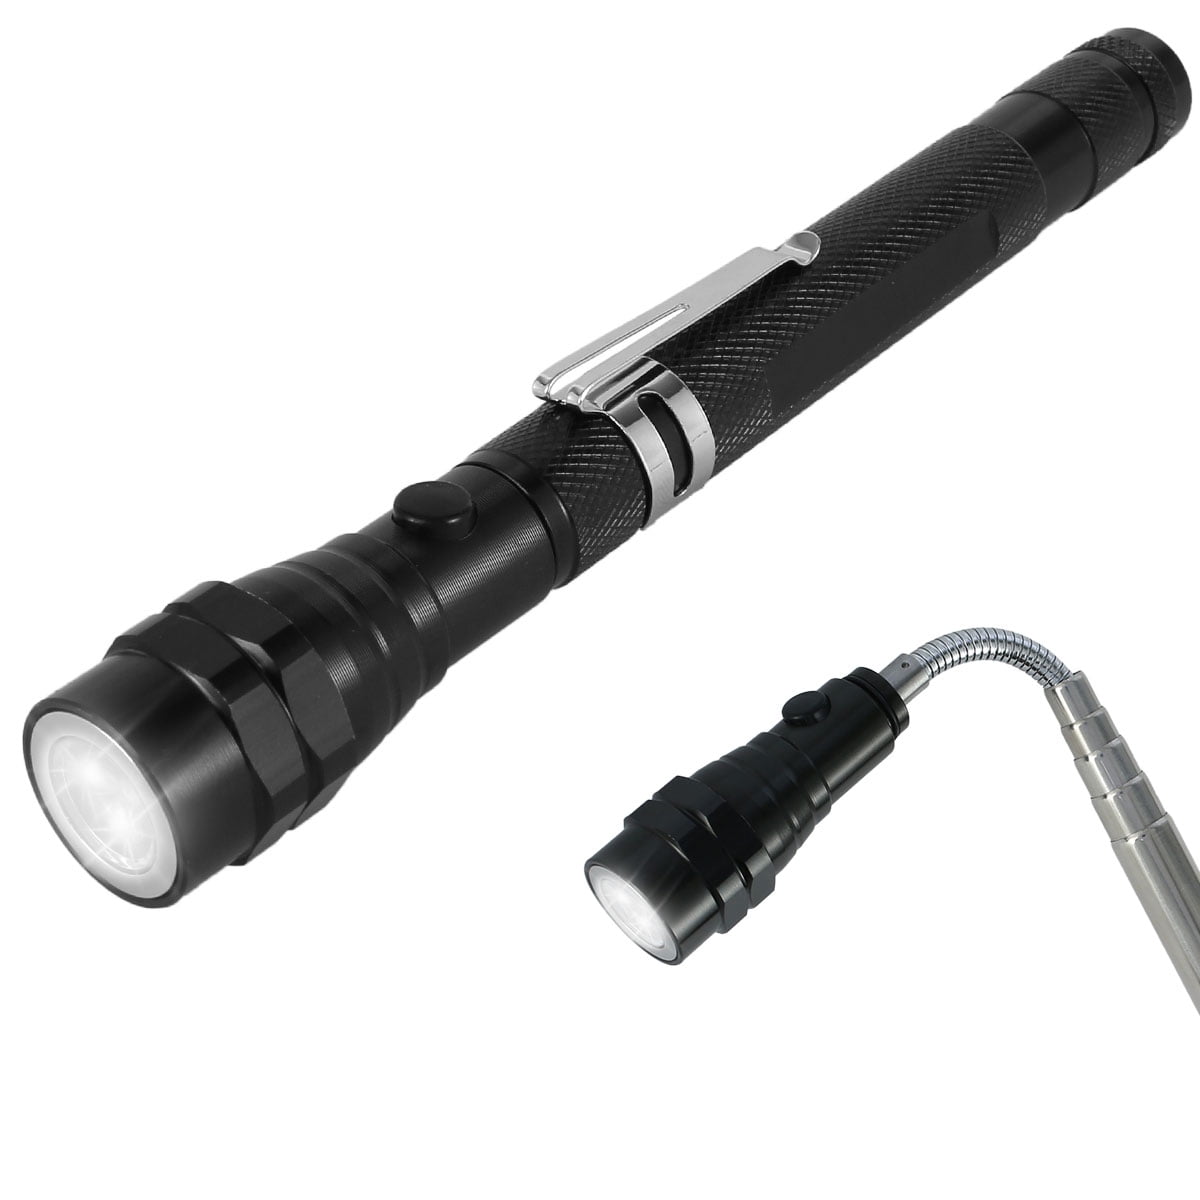 3 LED Telescopic Magnetic Torch Multipurpose Flash Light for Camping Travel Work 